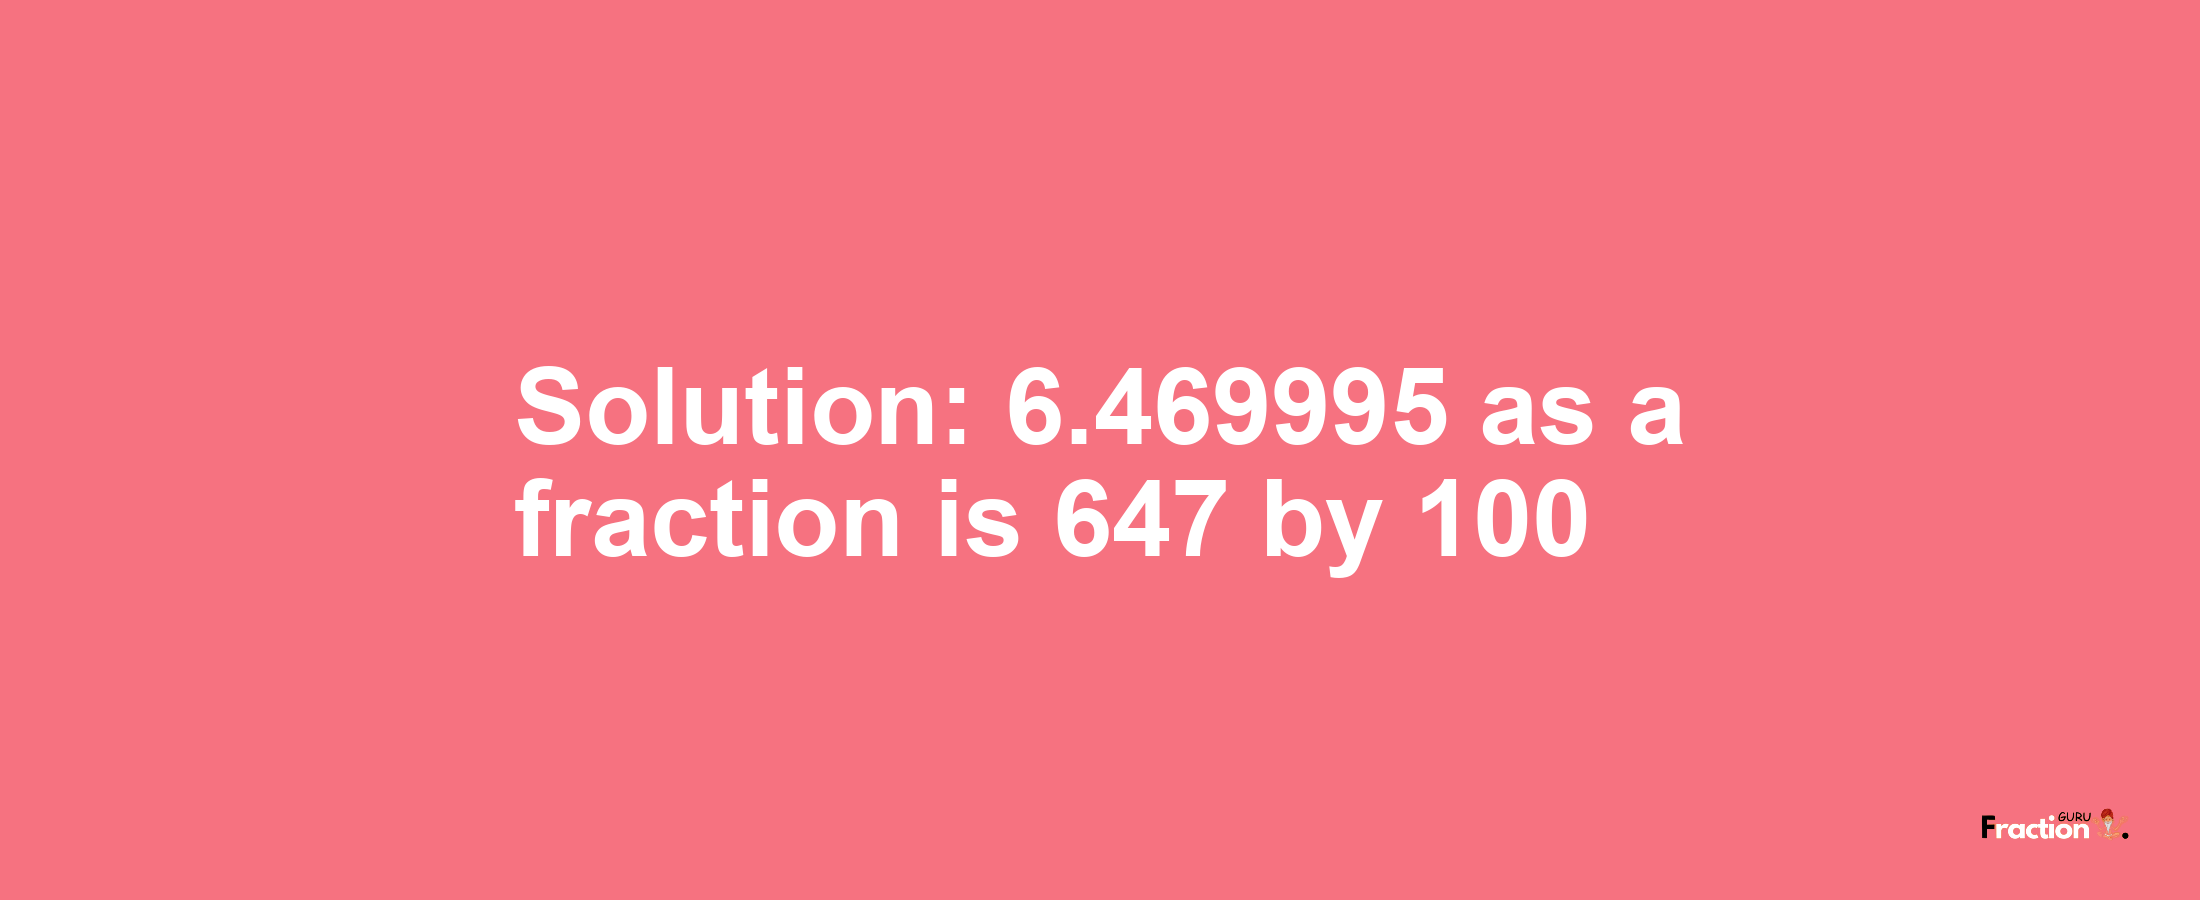 Solution:6.469995 as a fraction is 647/100